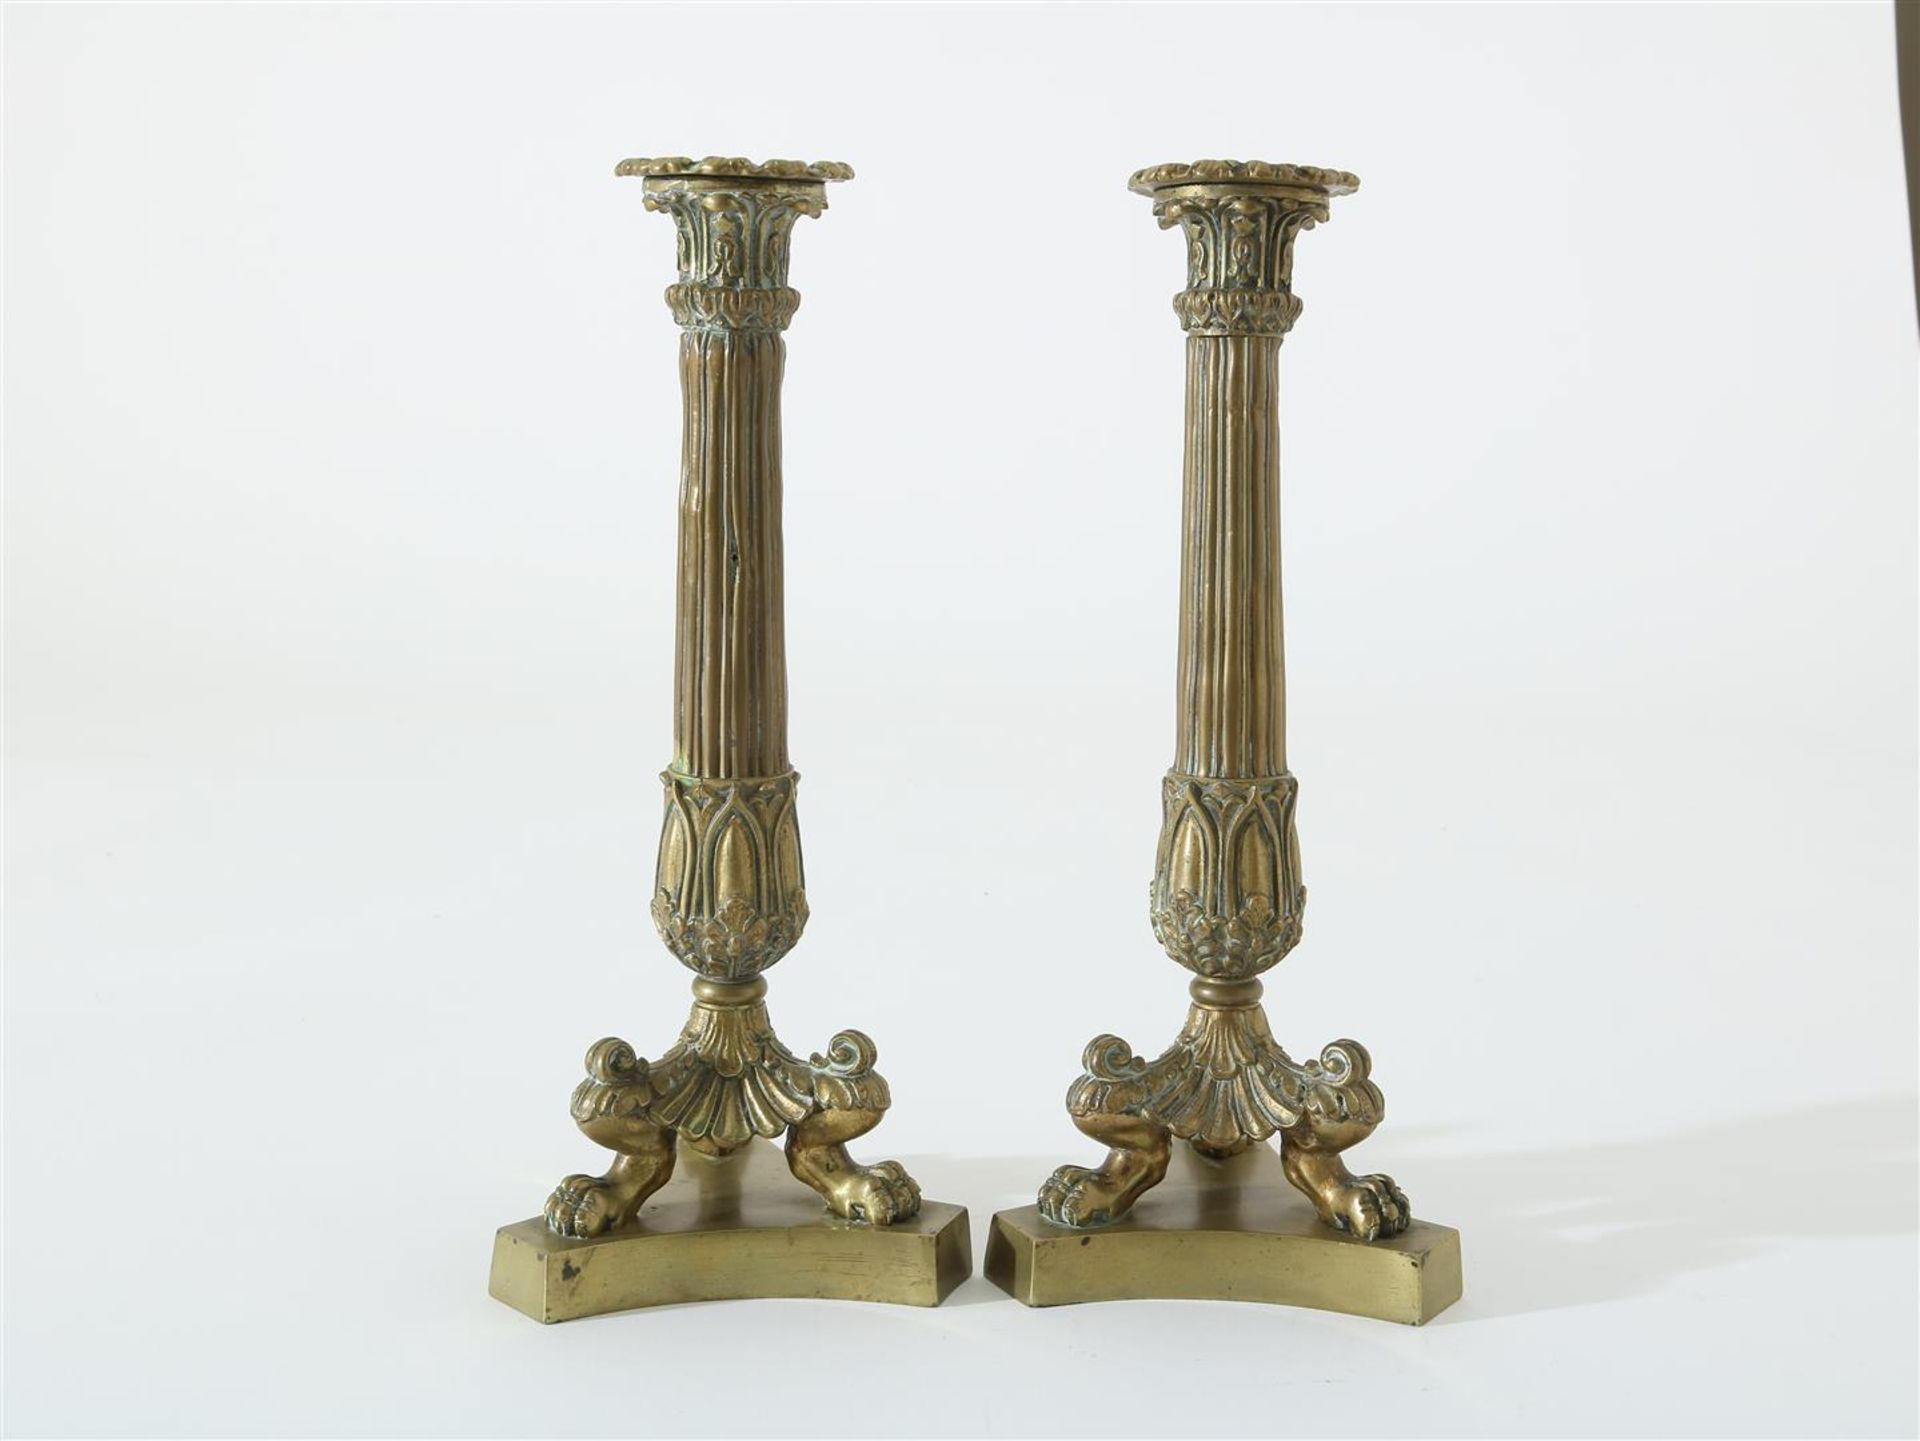 Two brass candlesticks on claw feet, 19th century, height 29 cm.